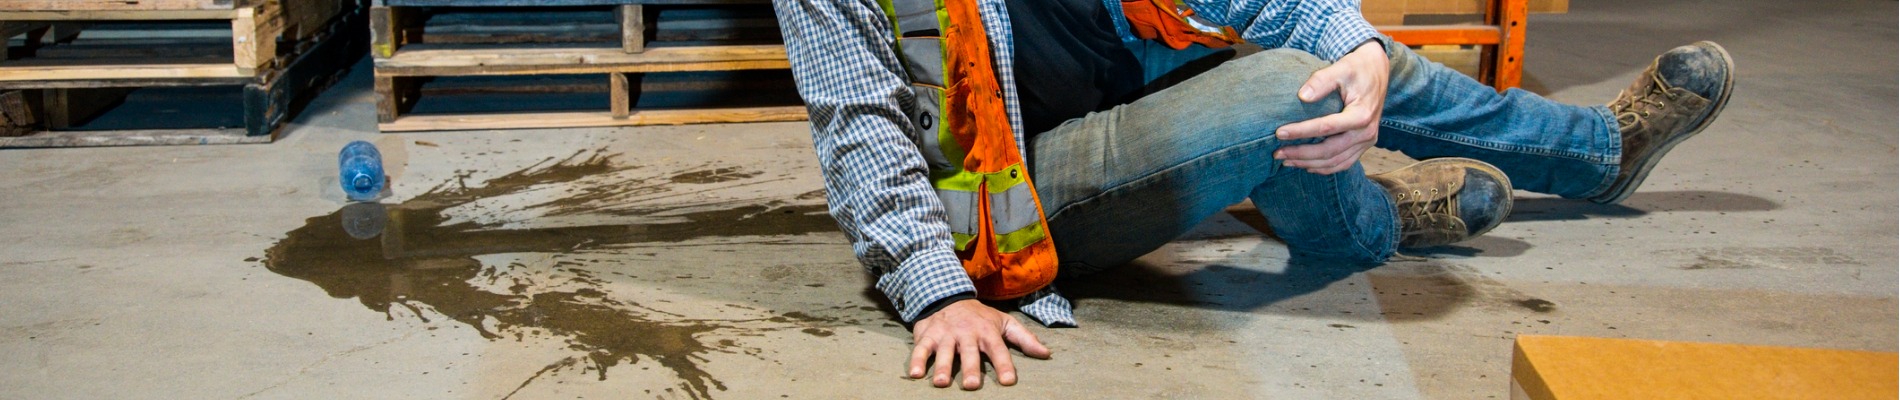 A worker injured in a slip and fall accident